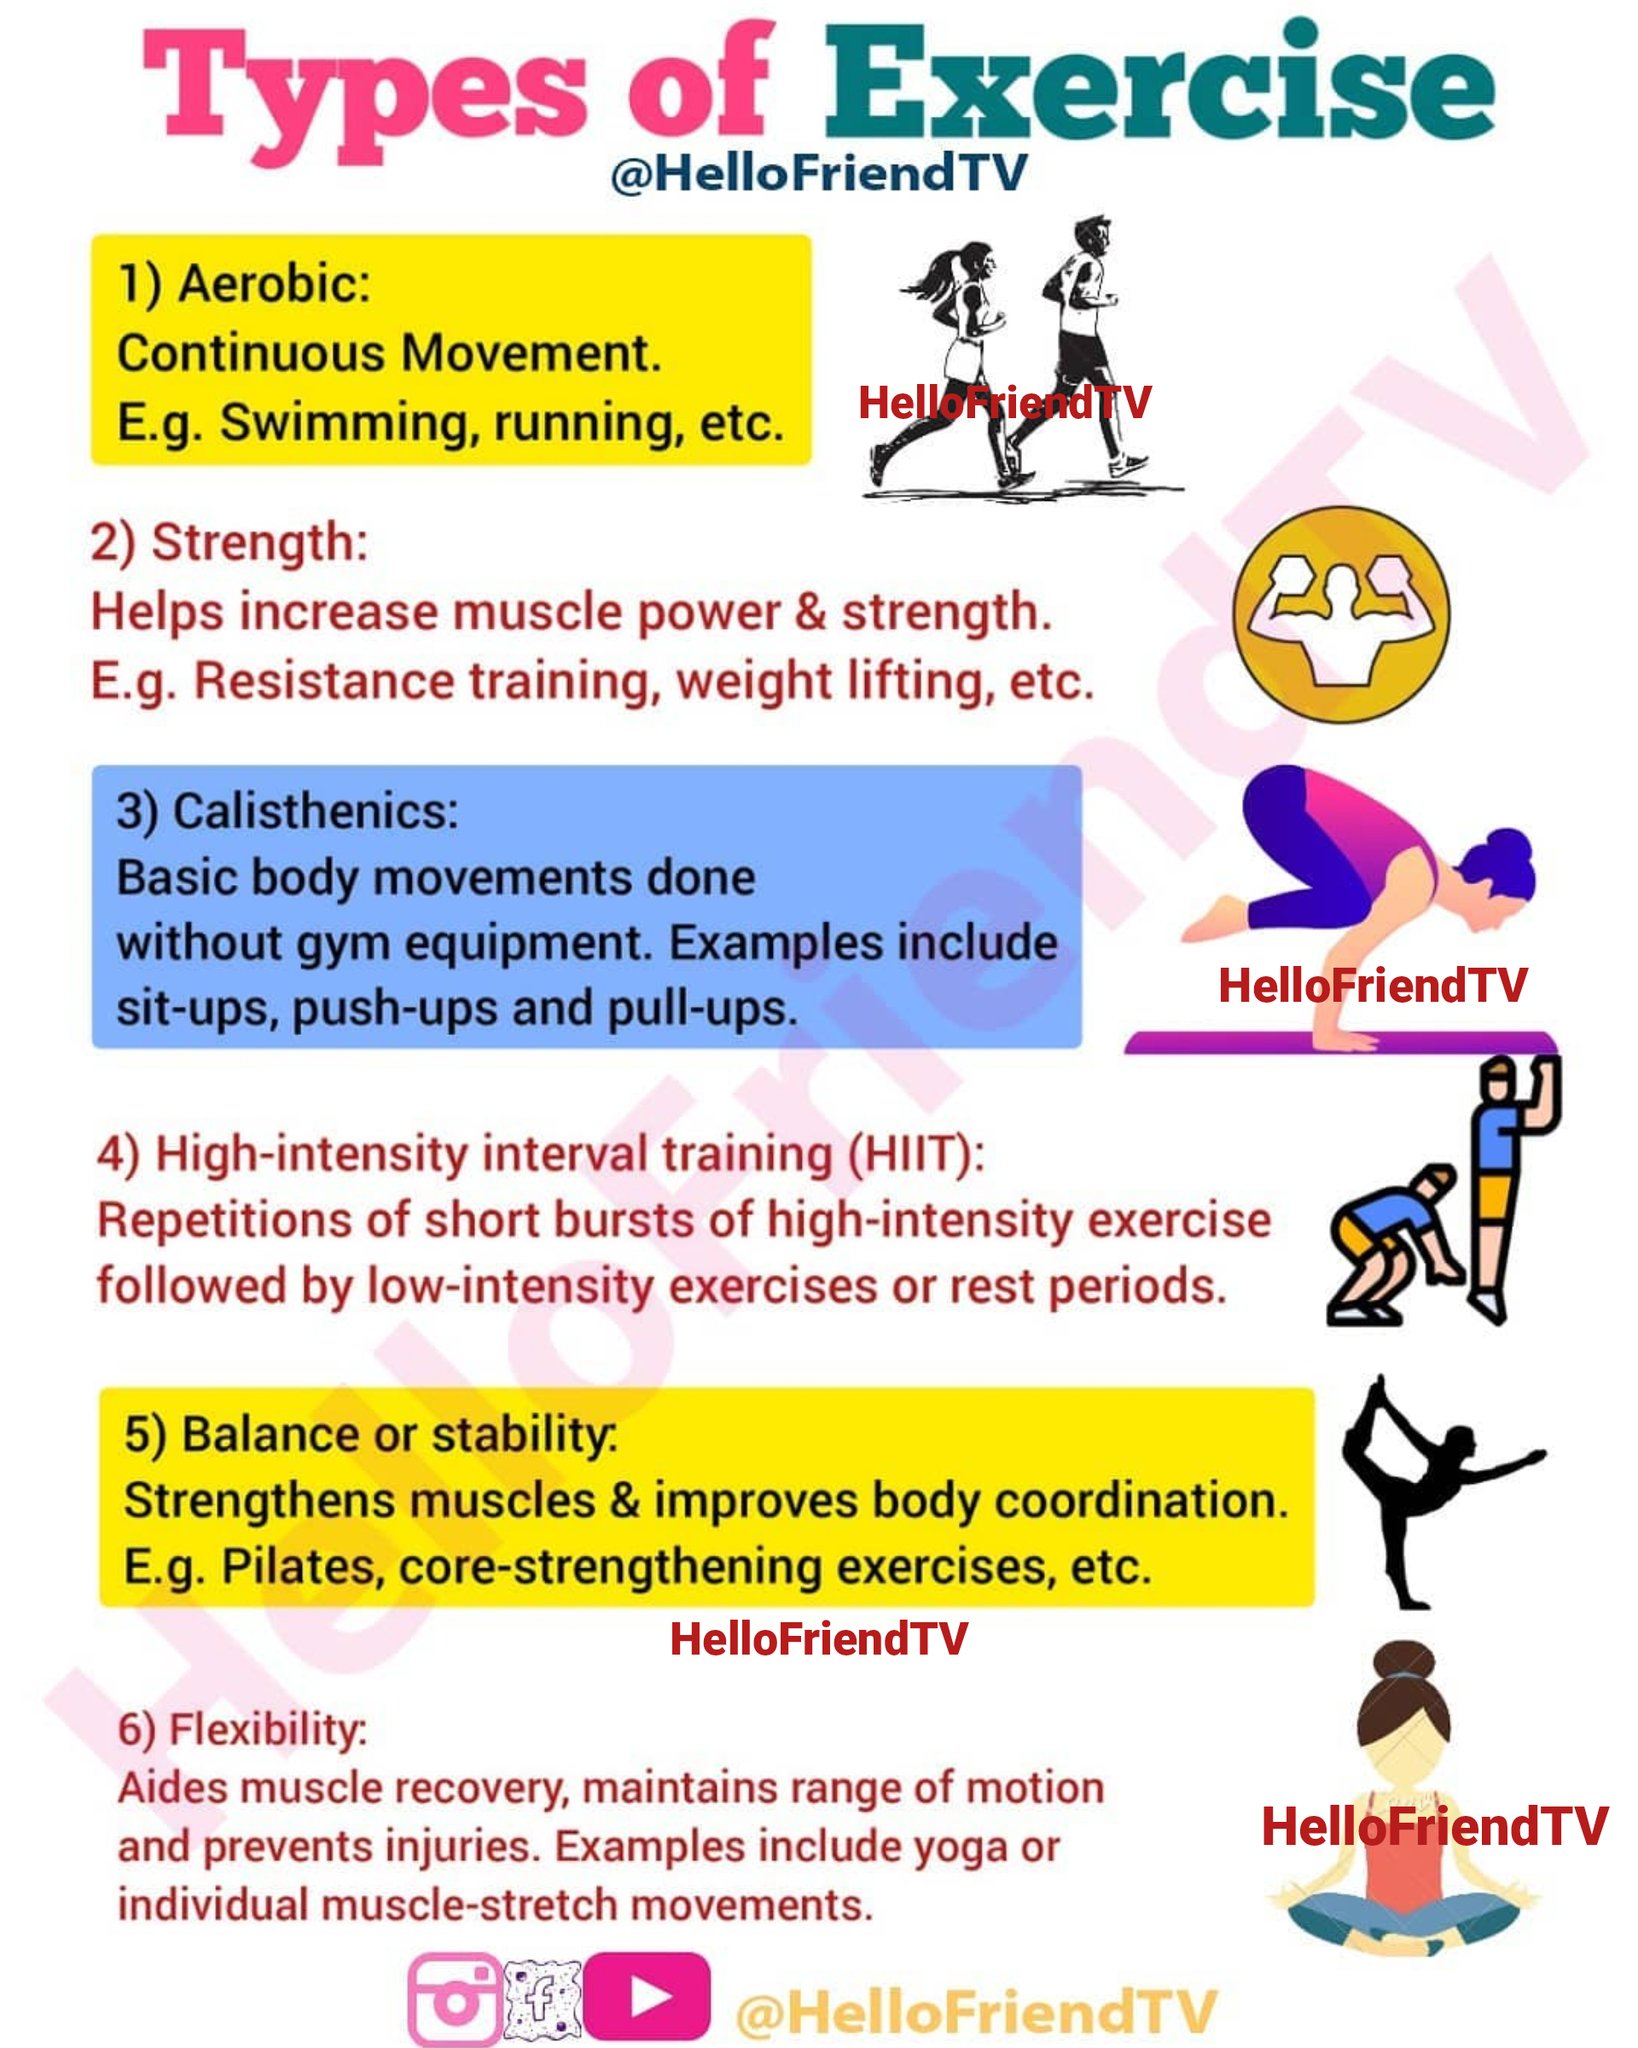 Hello Friend TV on X: Types of Exercises: Regular exercise is